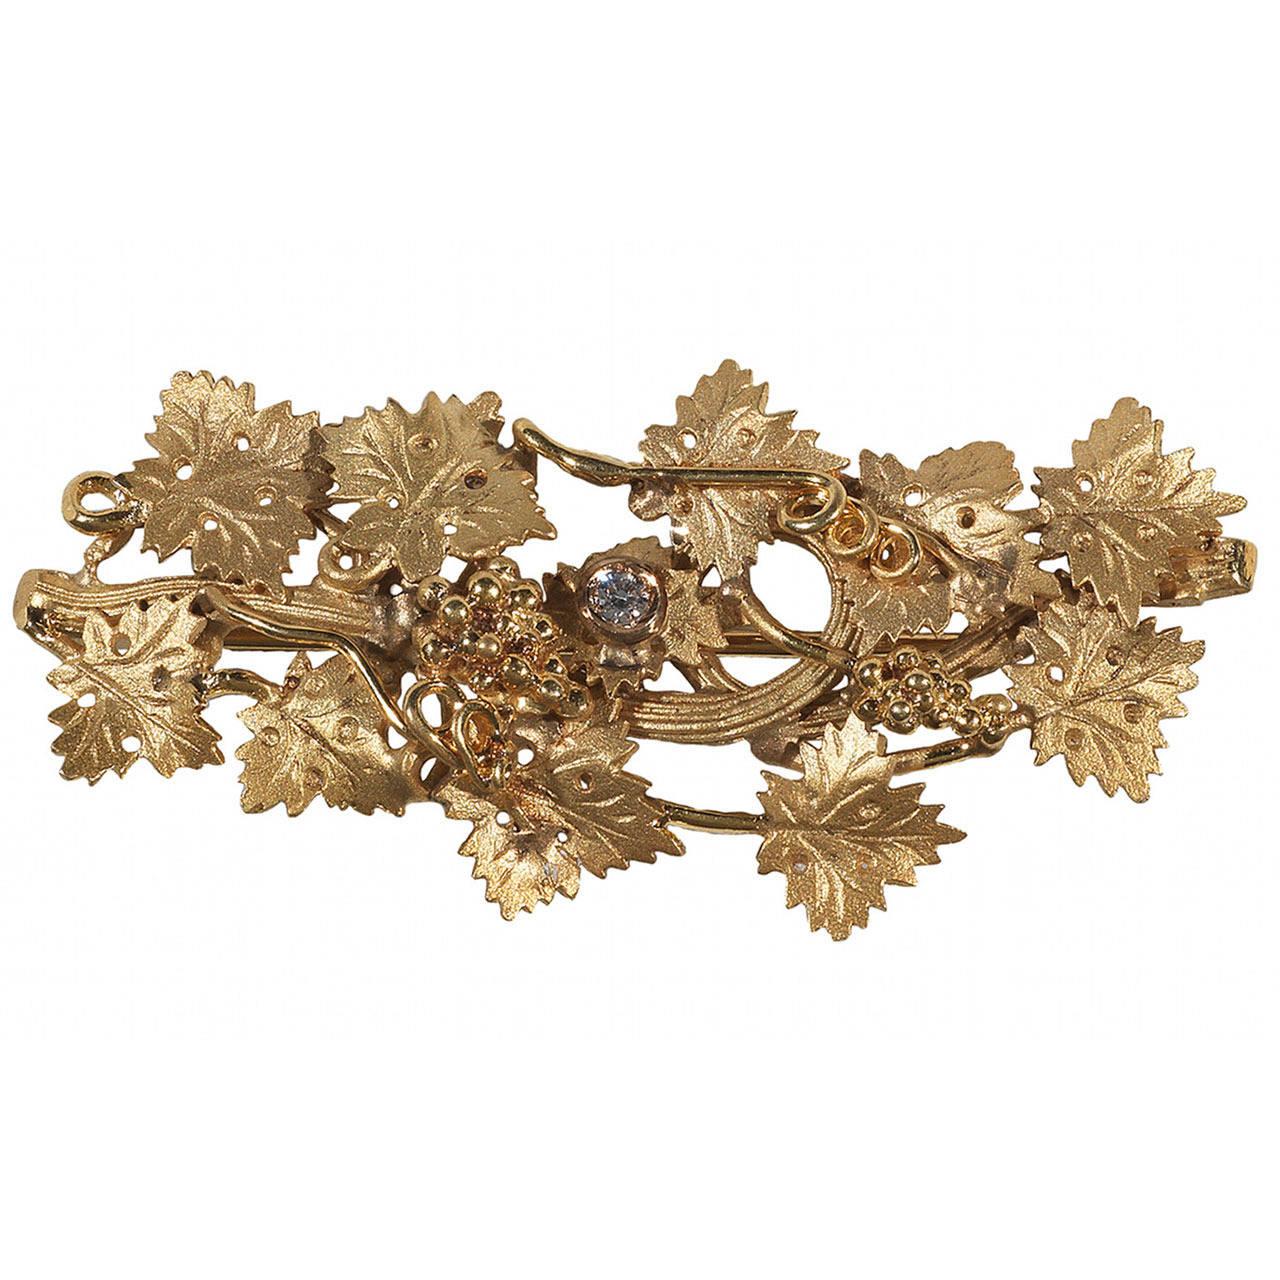 
A brooch of leaves and a bunch of grapes design. 
Mounted in 18Kt Gold

50 mm wide
23 mm high
Weight: 9.7 gr